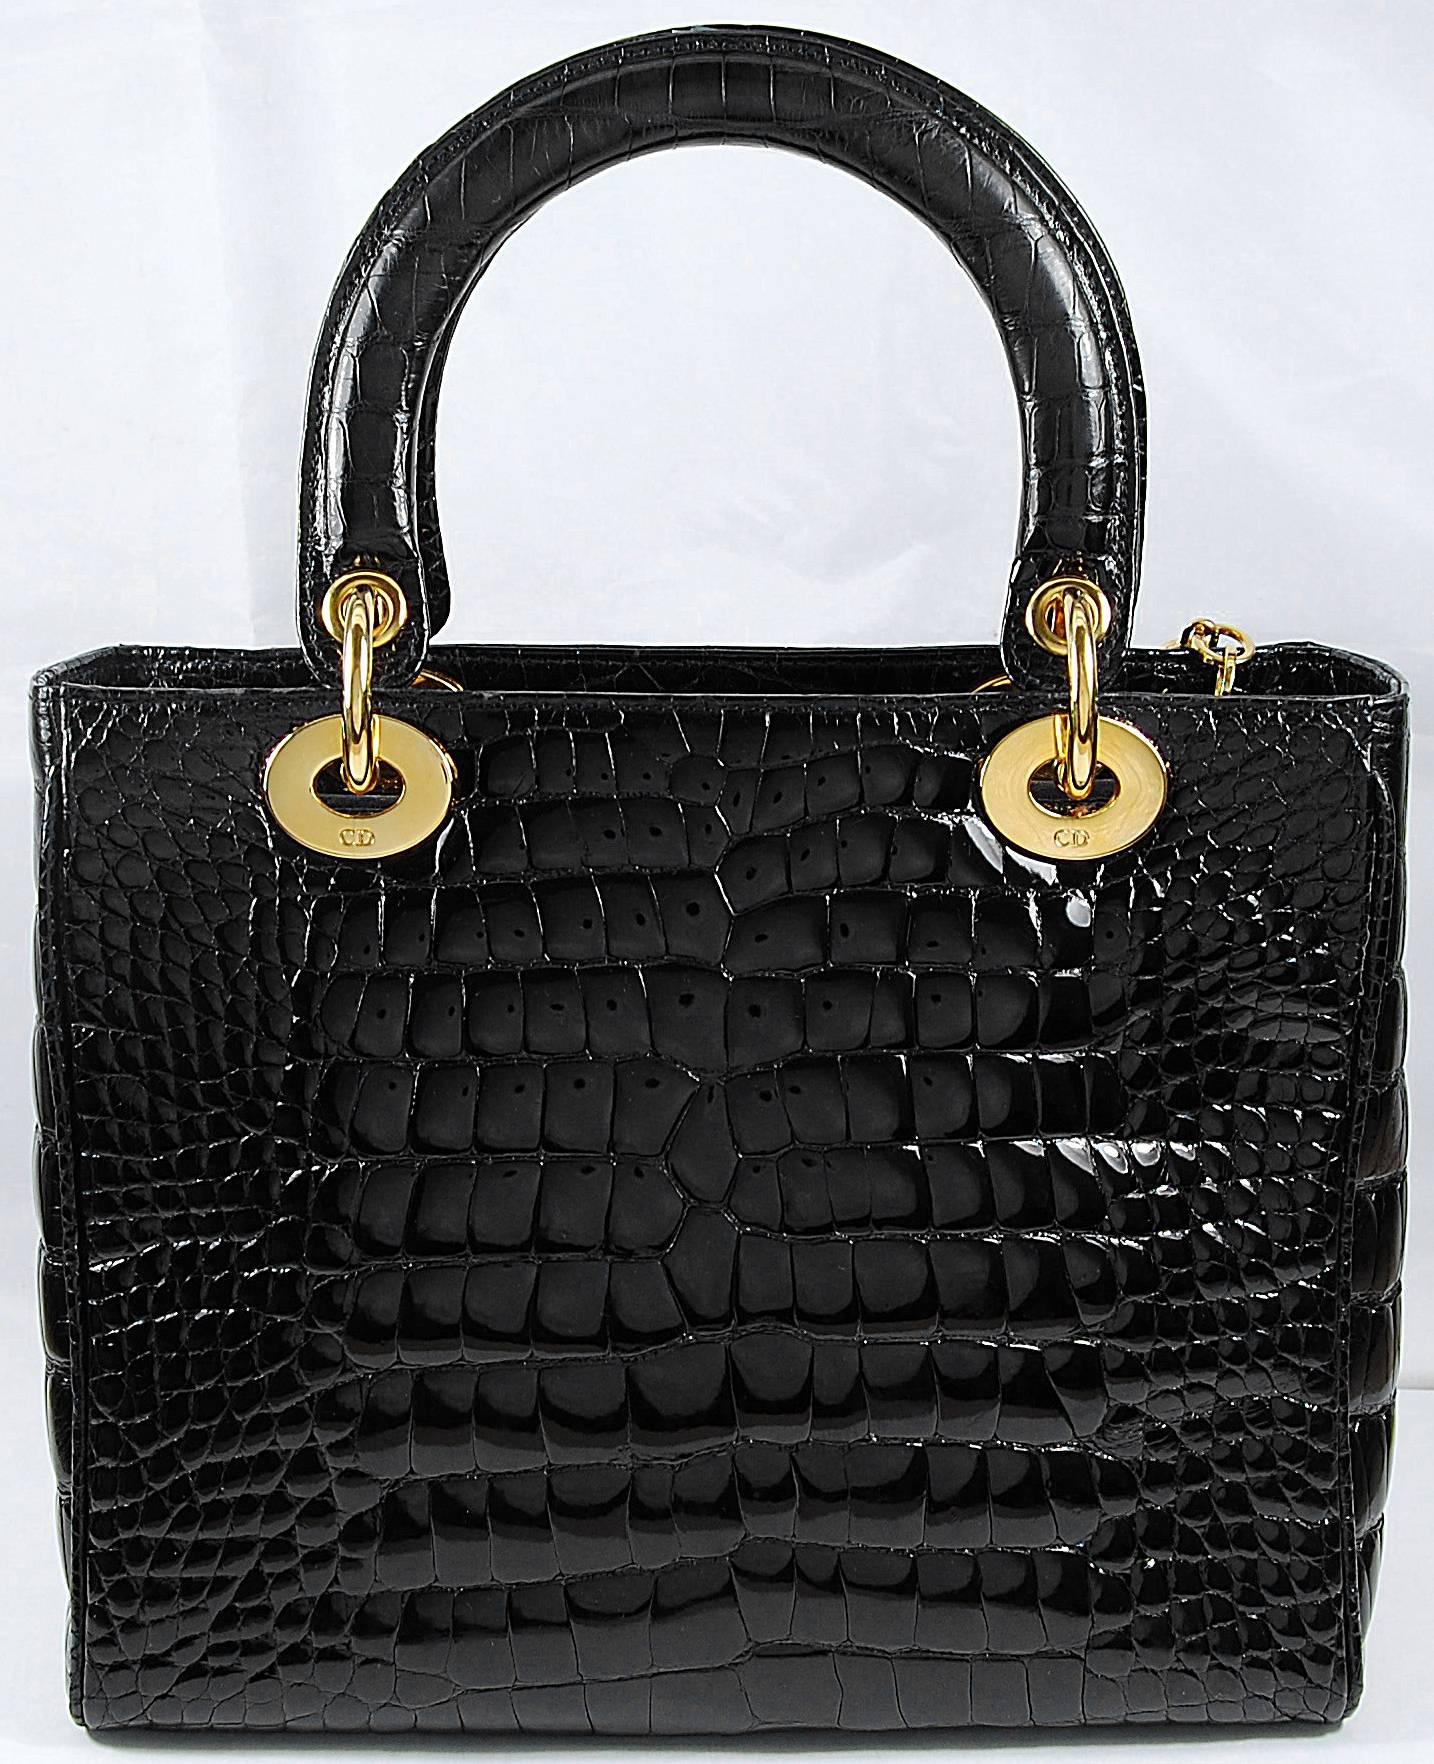 Christian Dior Black Crocodile Lady Bag with Gold Hardware
100% Authentic Christian Dior Bag
COLOR: Black
MATERIAL: Crocodile
HARDWARE: Gold
ORIGIN: France
CONDITION: Pristine
INCLUDES: Dustbag, Shoulder Strap